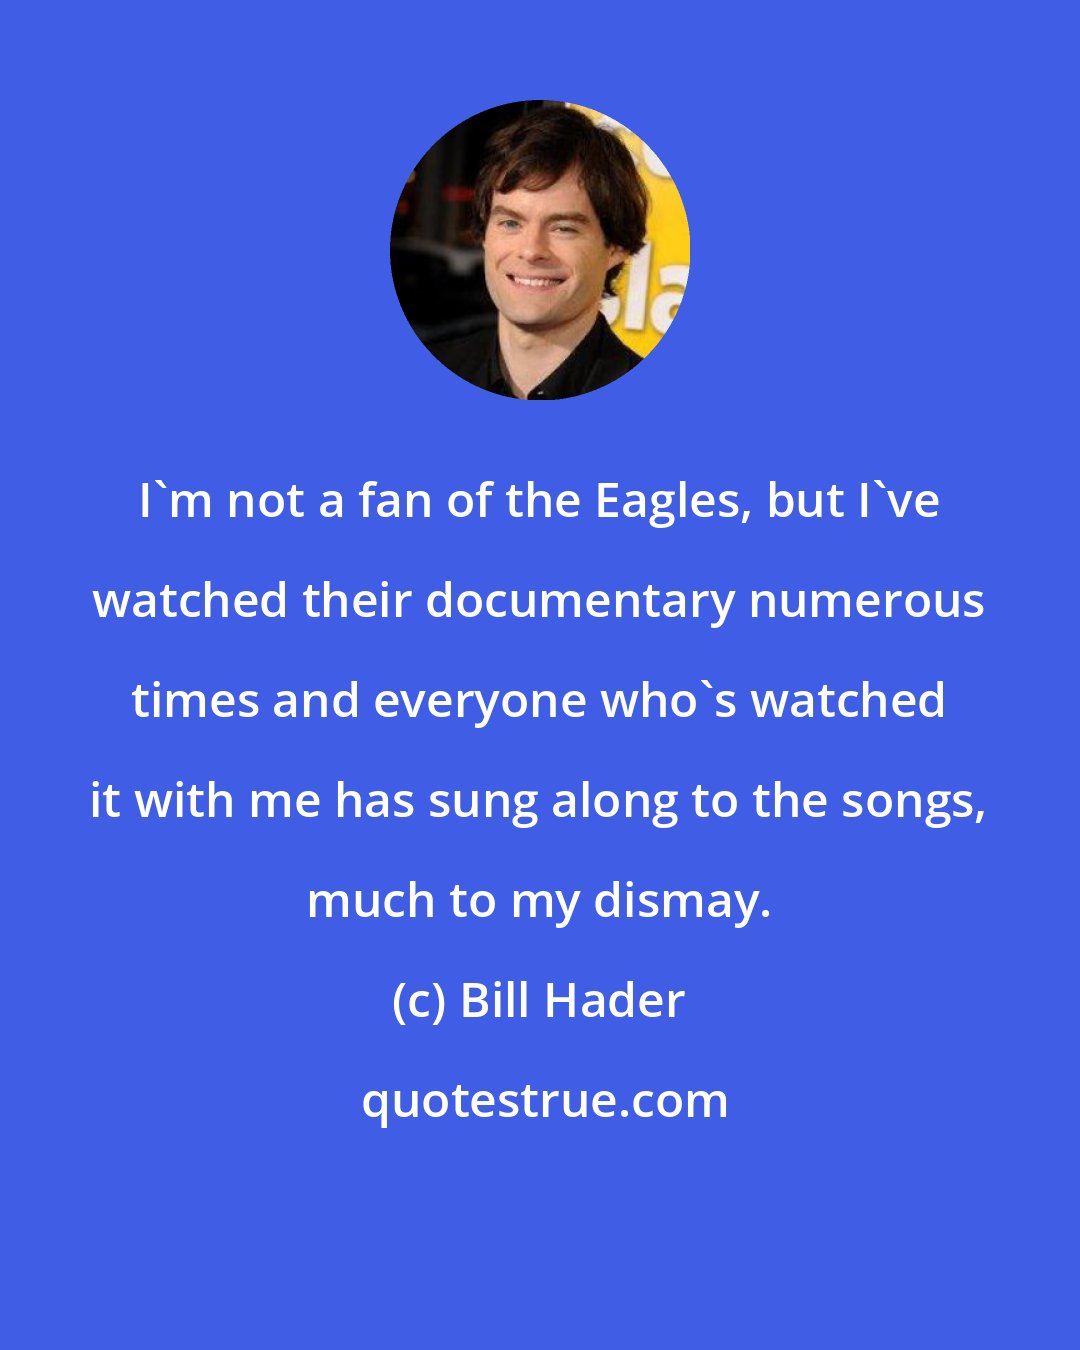 Bill Hader: I'm not a fan of the Eagles, but I've watched their documentary numerous times and everyone who's watched it with me has sung along to the songs, much to my dismay.